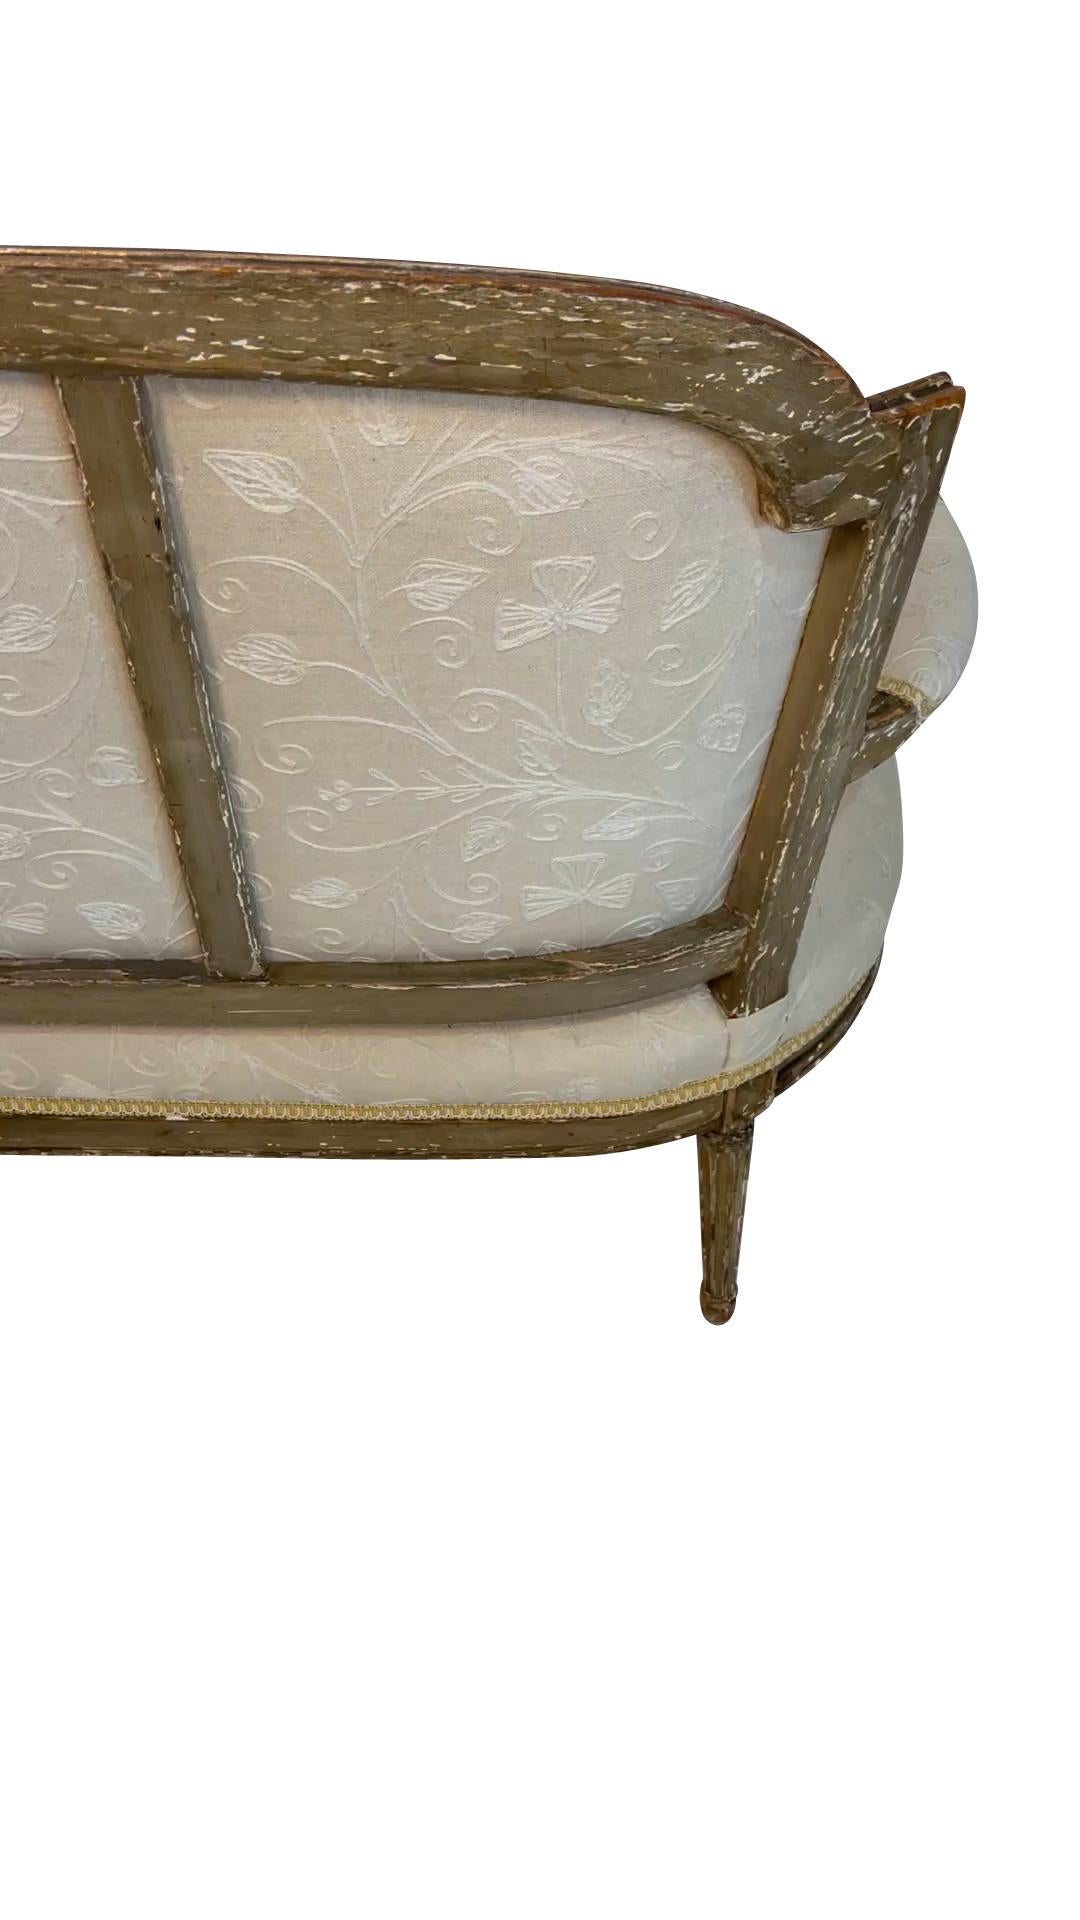 19th Century Louis XVI Style Giltwood Settee  In Good Condition For Sale In Essex, MA